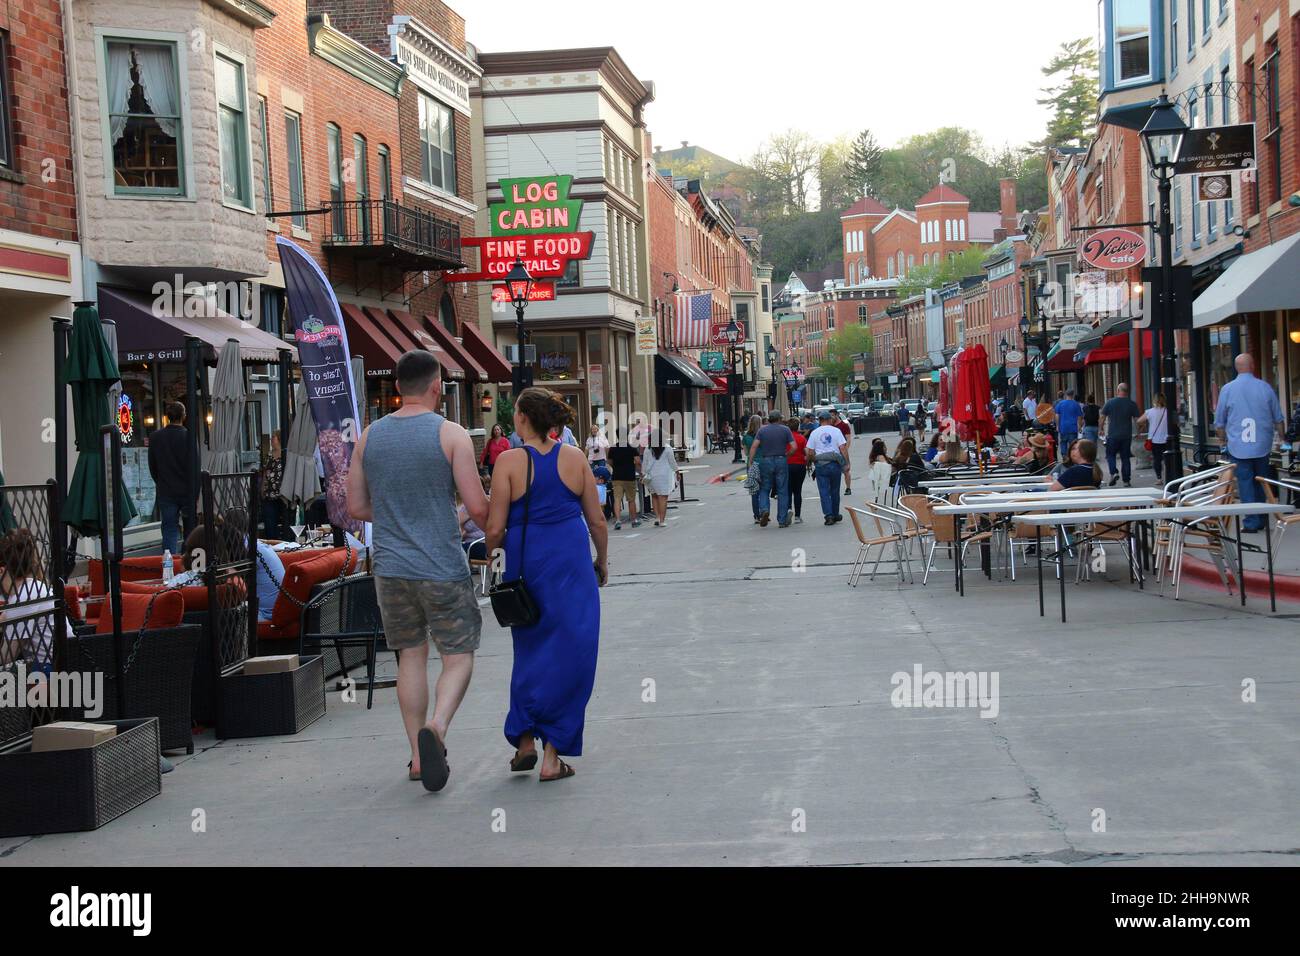 Galena, IL, USA - May 2, 2021: People stroll and dine at street side tables on a warm spring night, after COVID restrictions are partially lifted.  Ga Stock Photo